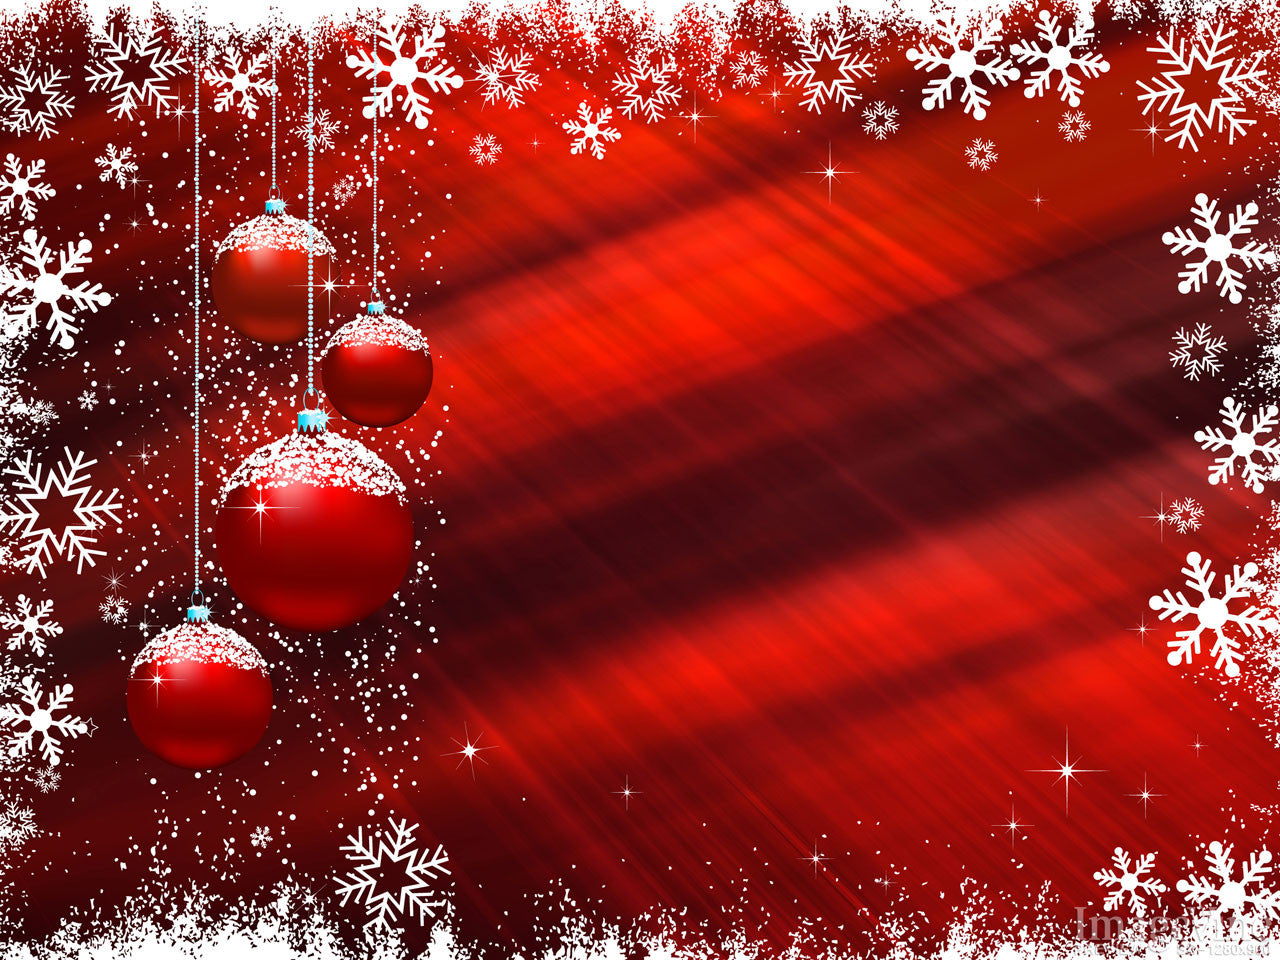 Christmas Color Imagevine Coloring Wallpapers Download Free Images Wallpaper [coloring654.blogspot.com]